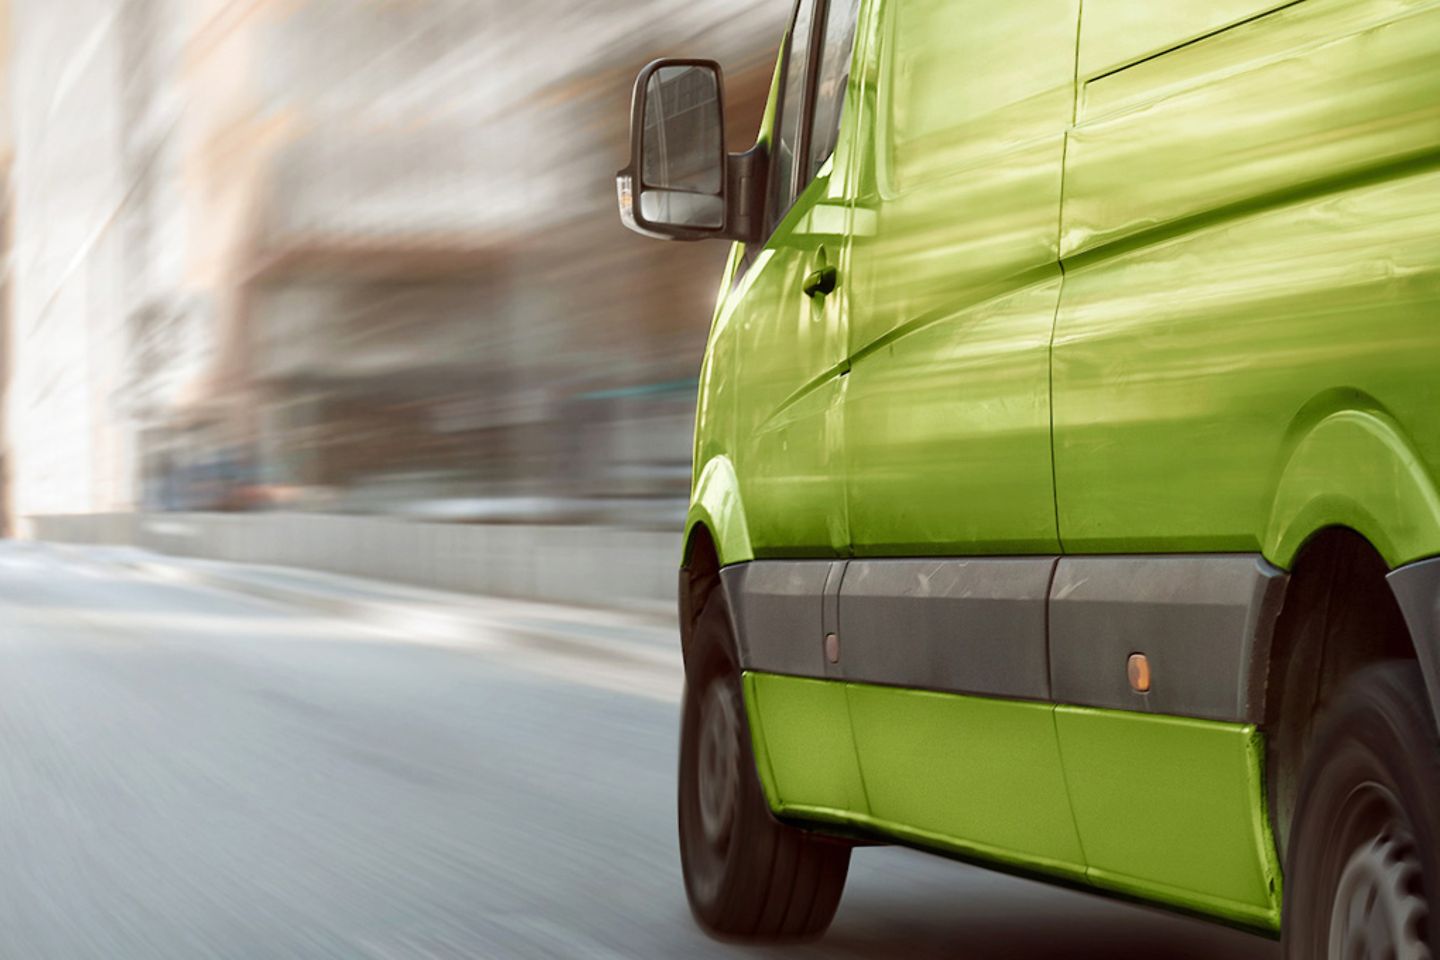 Green commercial van driving in the city